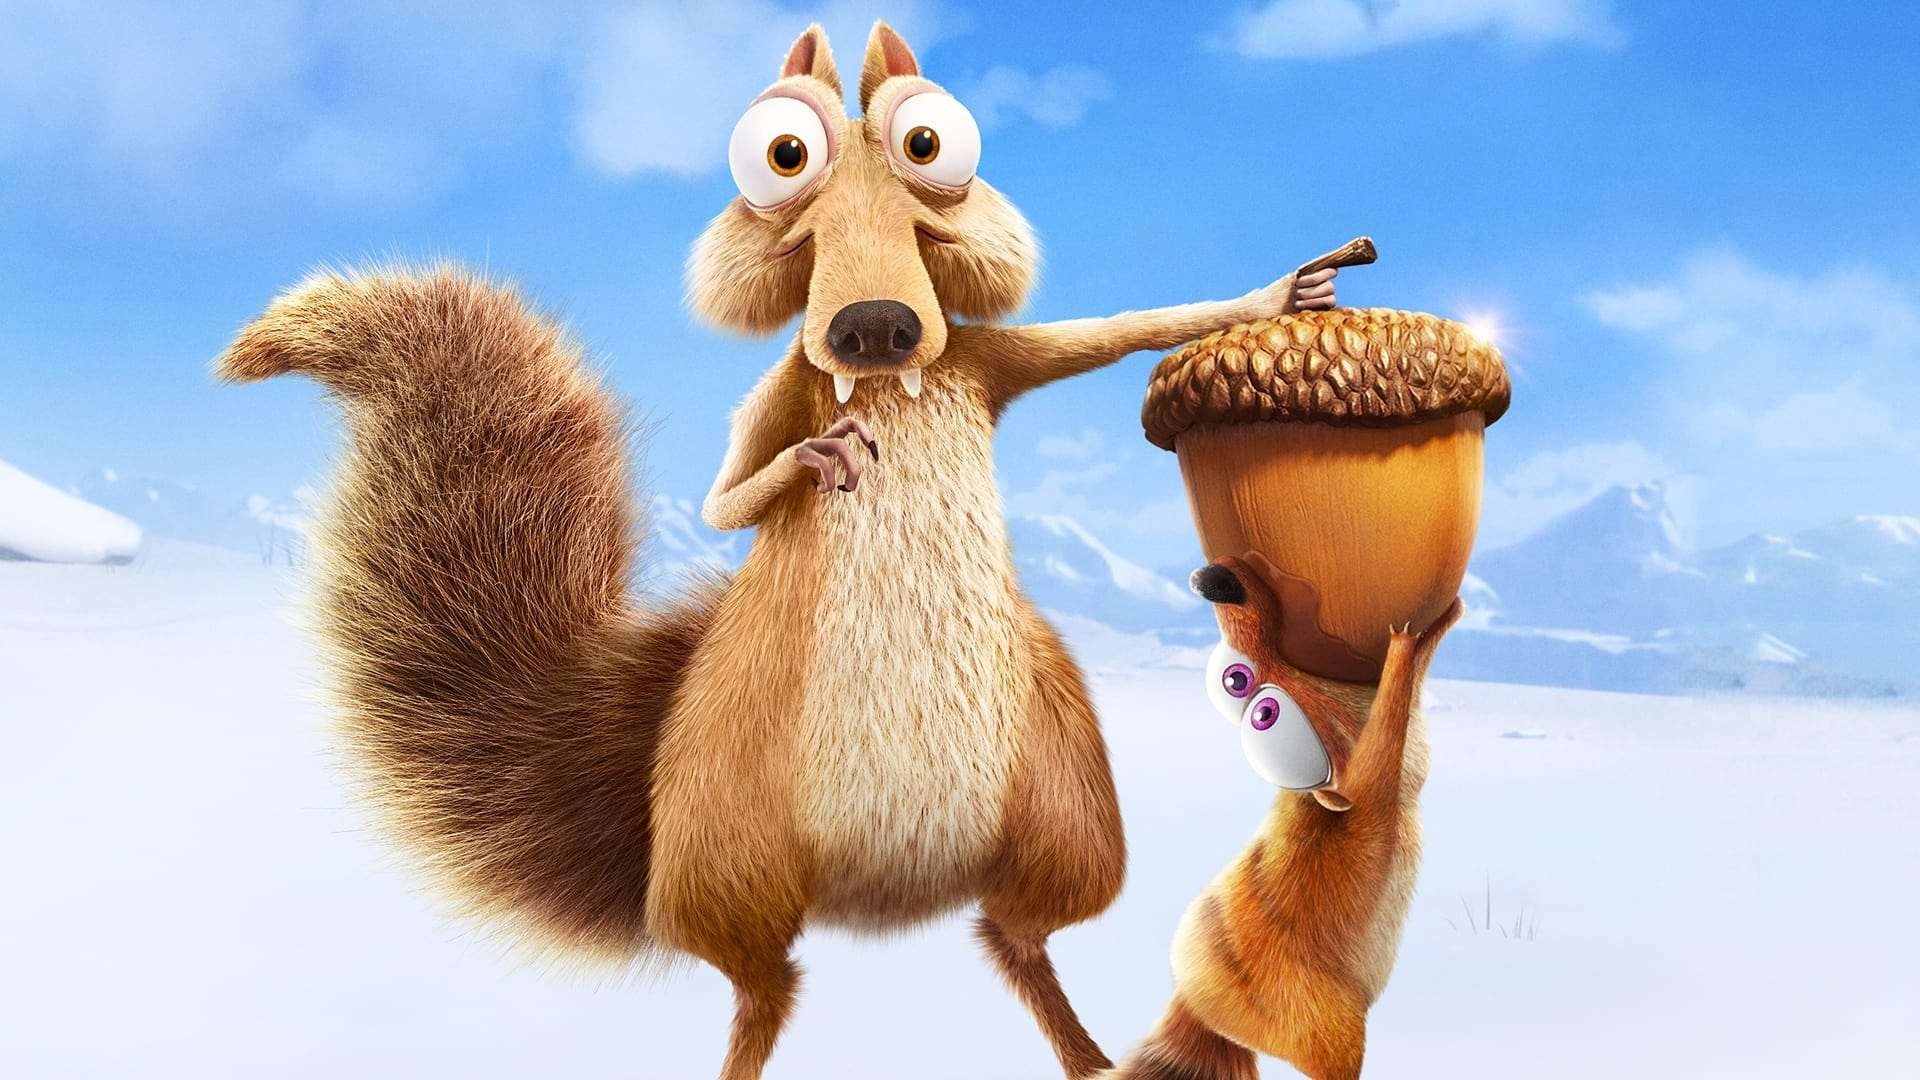 Ice Age: Scrat Tales Wallpapers (16+ images inside)